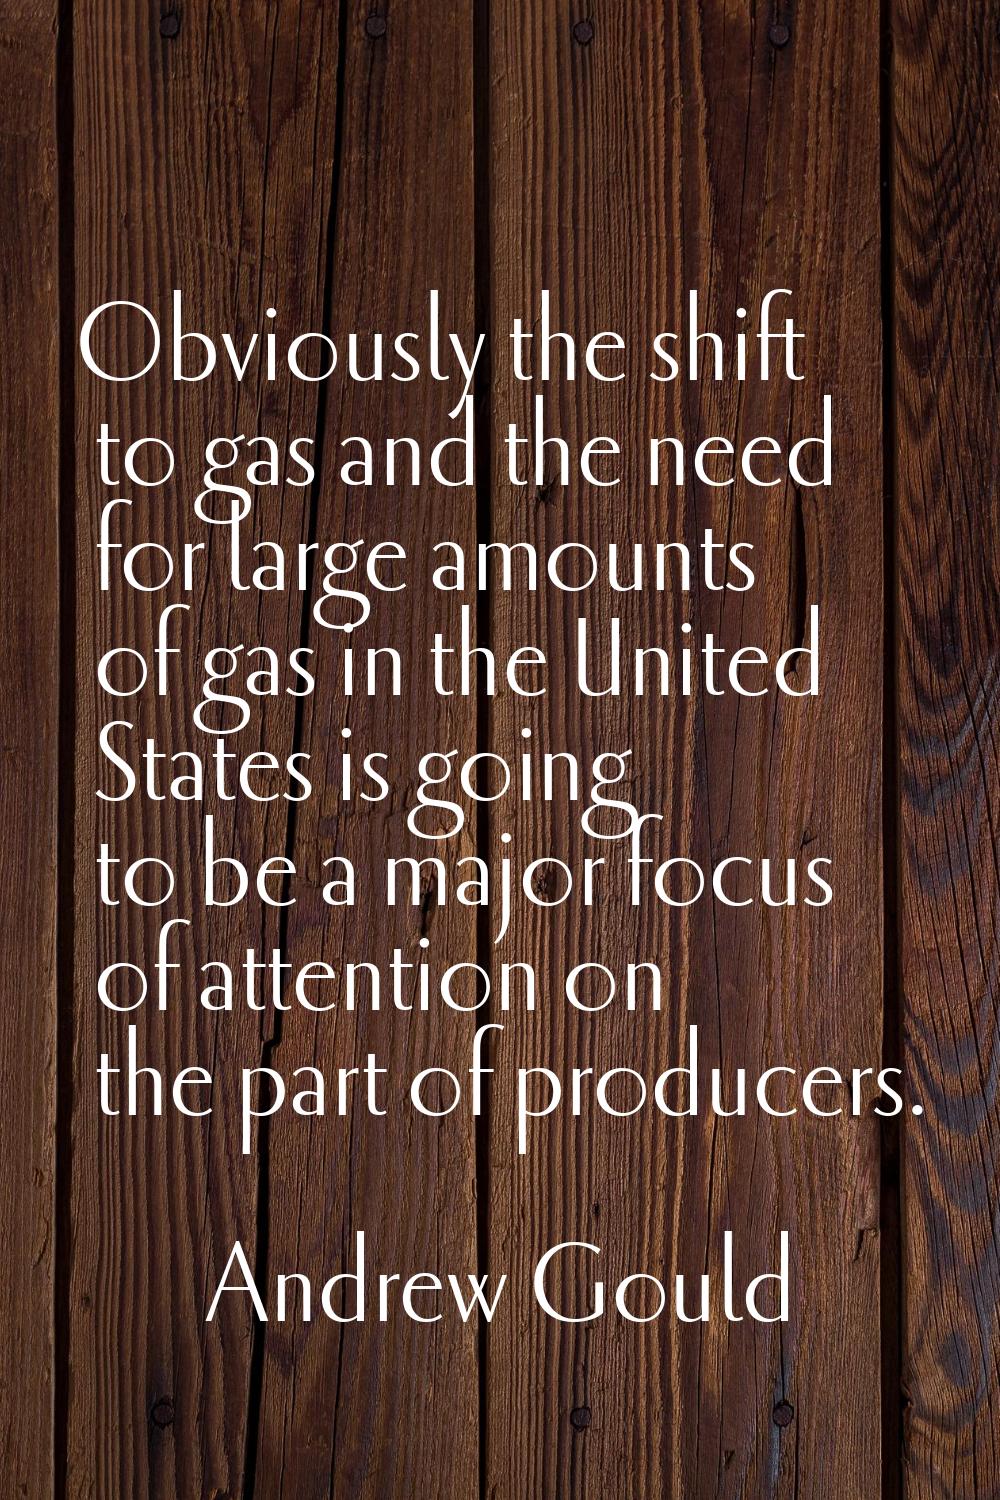 Obviously the shift to gas and the need for large amounts of gas in the United States is going to b